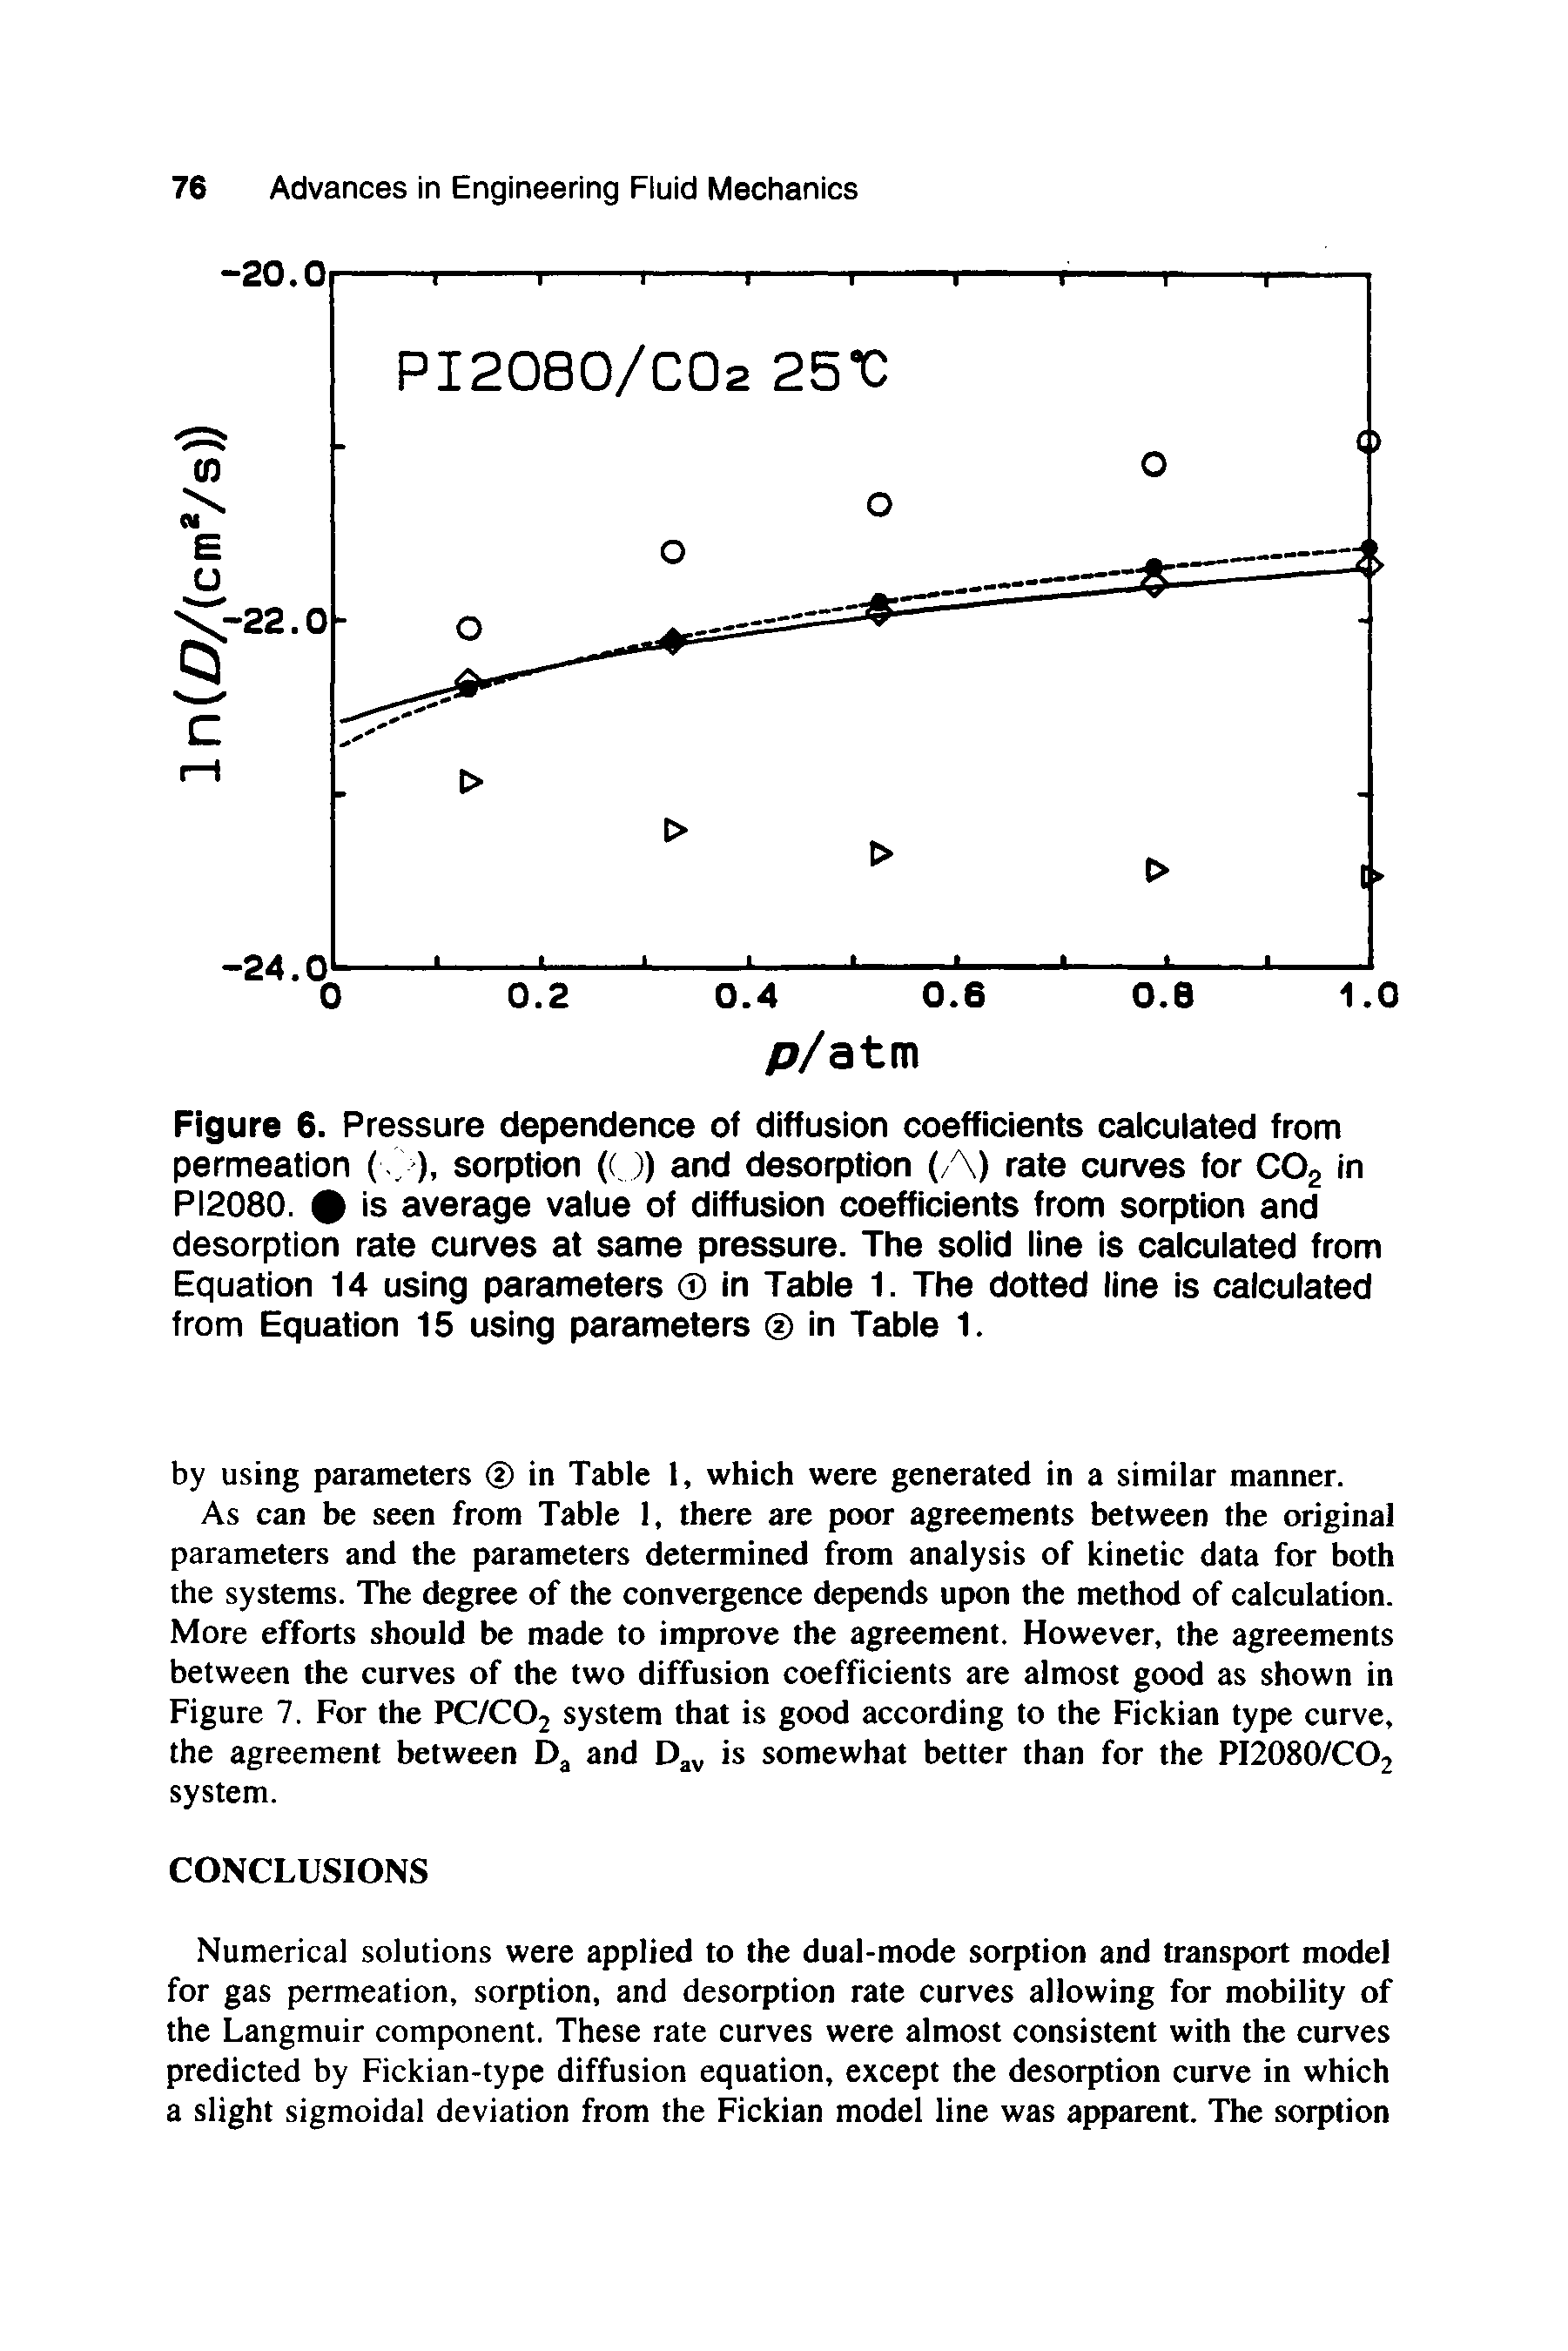 Figure 6. Pressure dependence of diffusion coefficients calcuiated from permeation ( -), sorption ((,)) and desorption (A) rate curves for CO2 in PI2080. 9 is average vaiue of diffusion coefficients from sorption and desorption rate curves at same pressure. The soiid iine is caicuiated from Equation 14 using parameters 0 in Tabie 1. The dotted line is calculated from Equation 15 using parameters in Table 1.